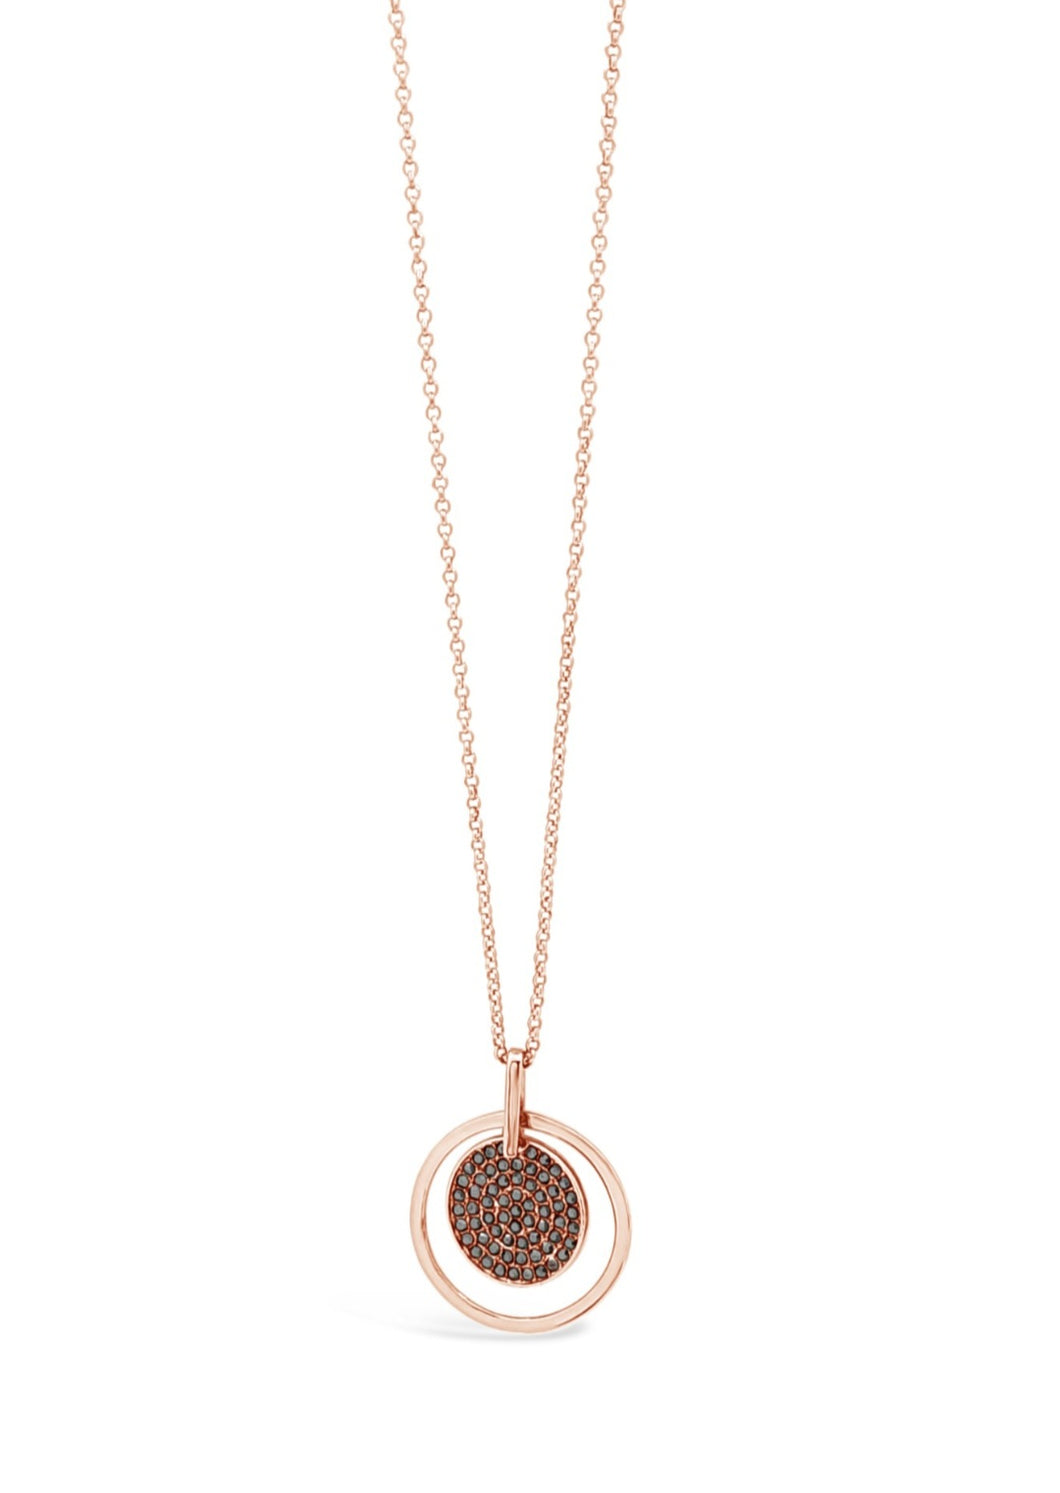 Rose Gold Plated Black Round Pendant And Chain